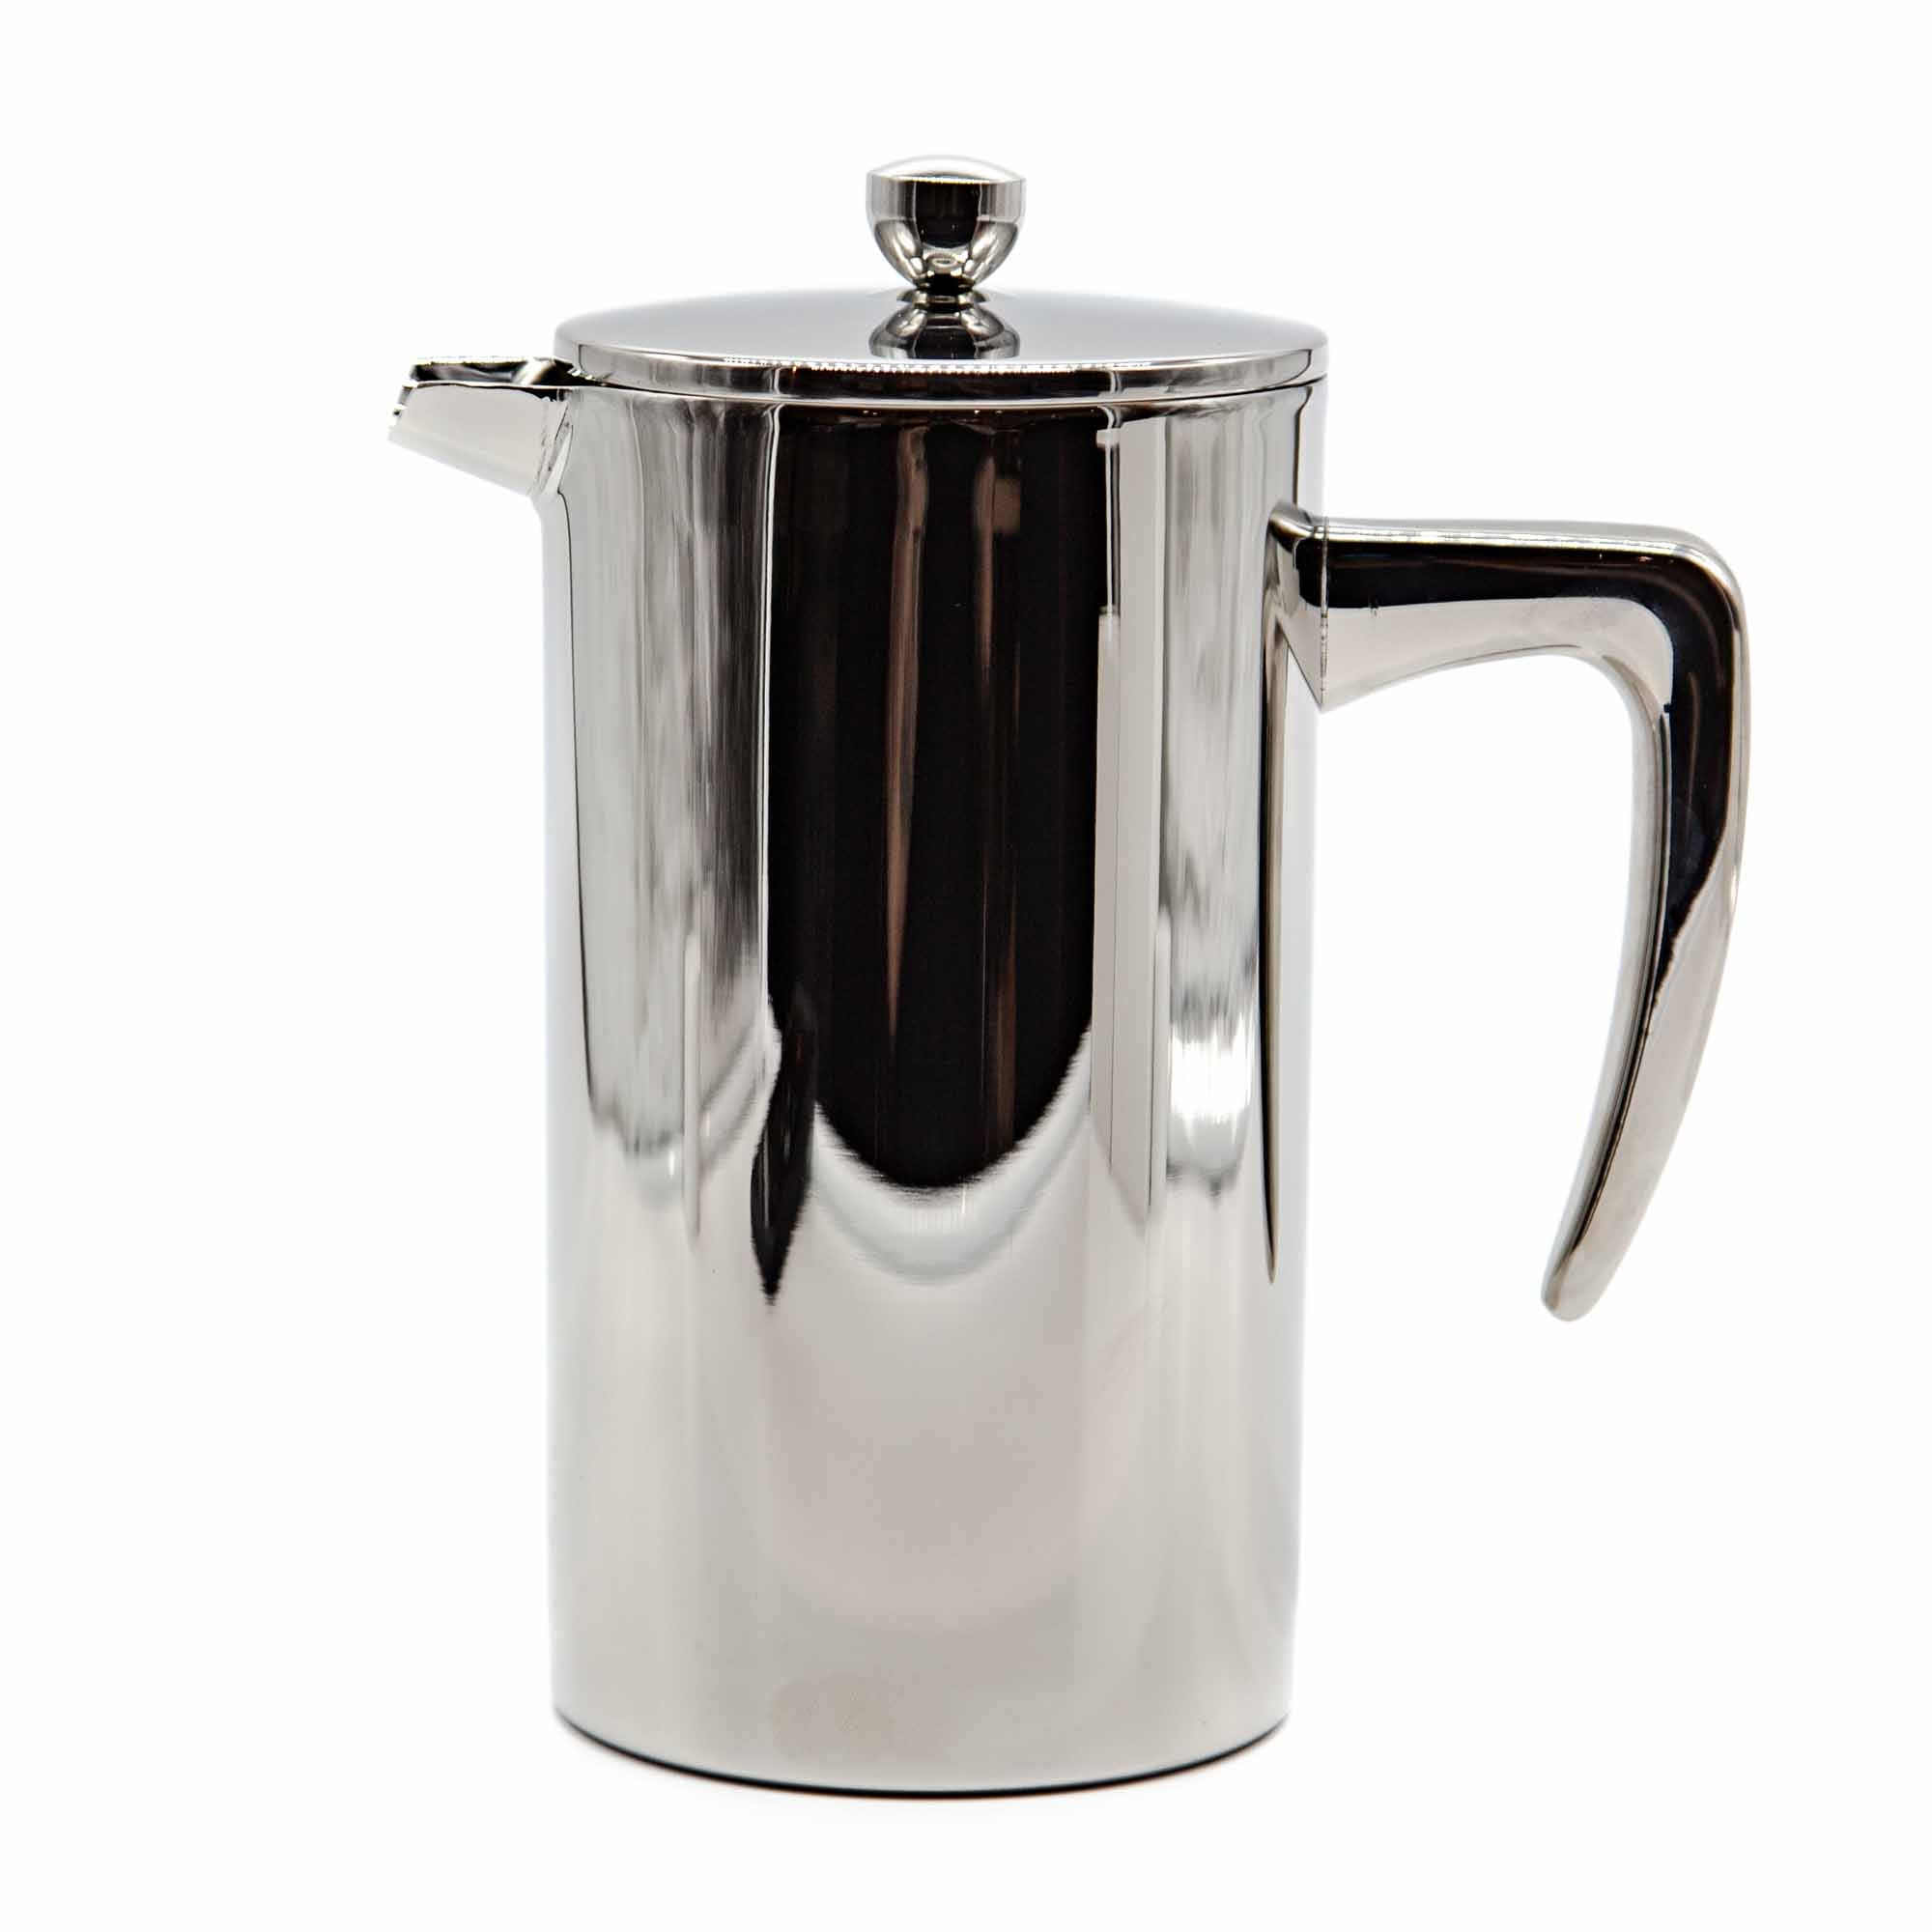 Zurich Coffee Vault Premium Coffee Canister Airtight | Large Stainless Steel Coffee